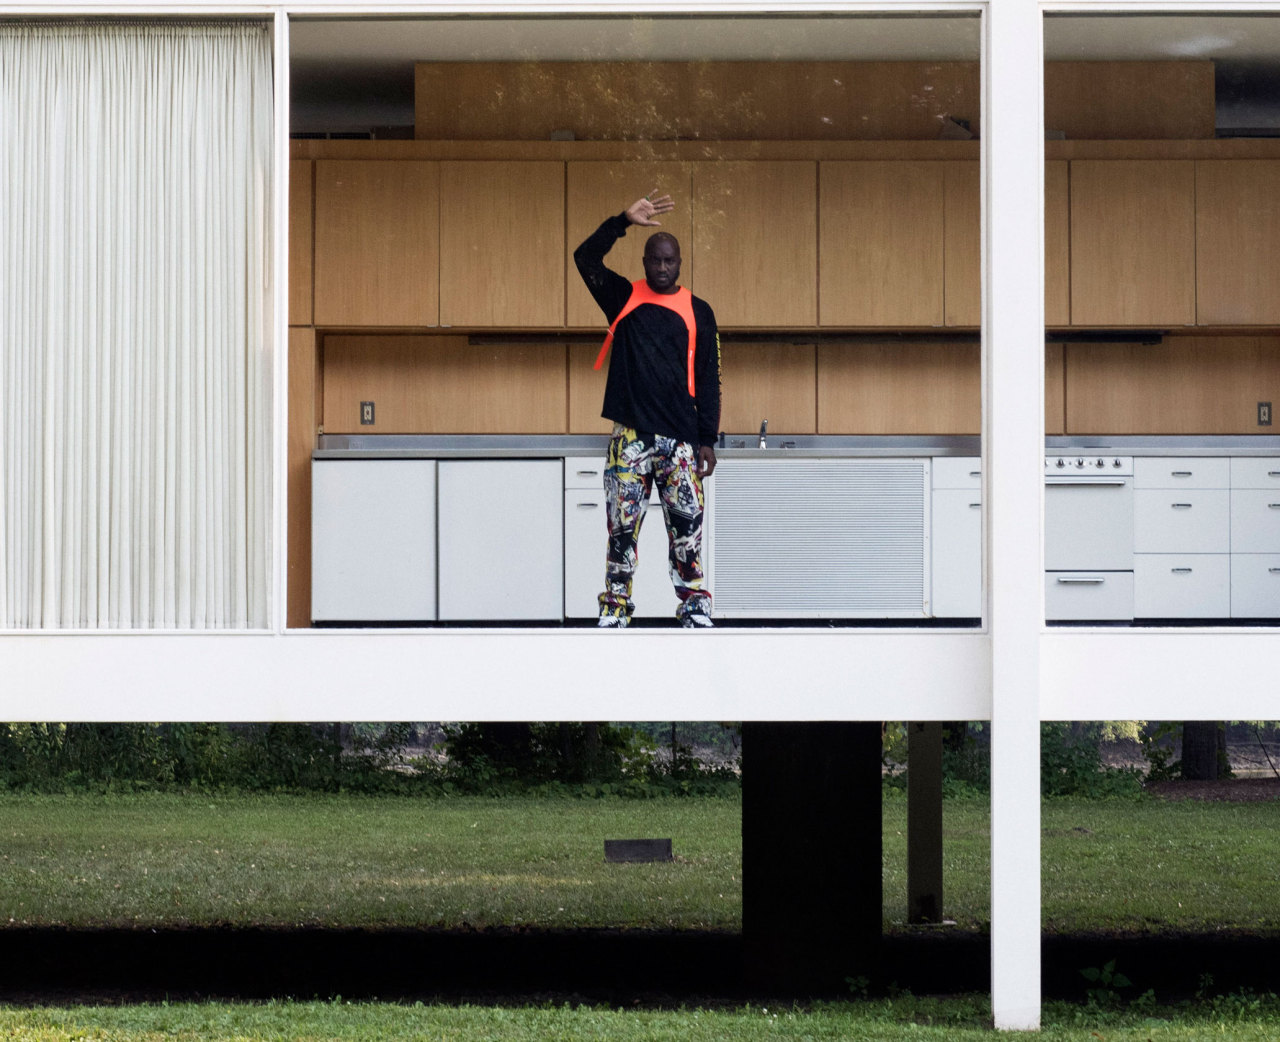 Virgil Abloh at the Farnsworth house (Mies van der Rohe) Rest in Peace 🕊